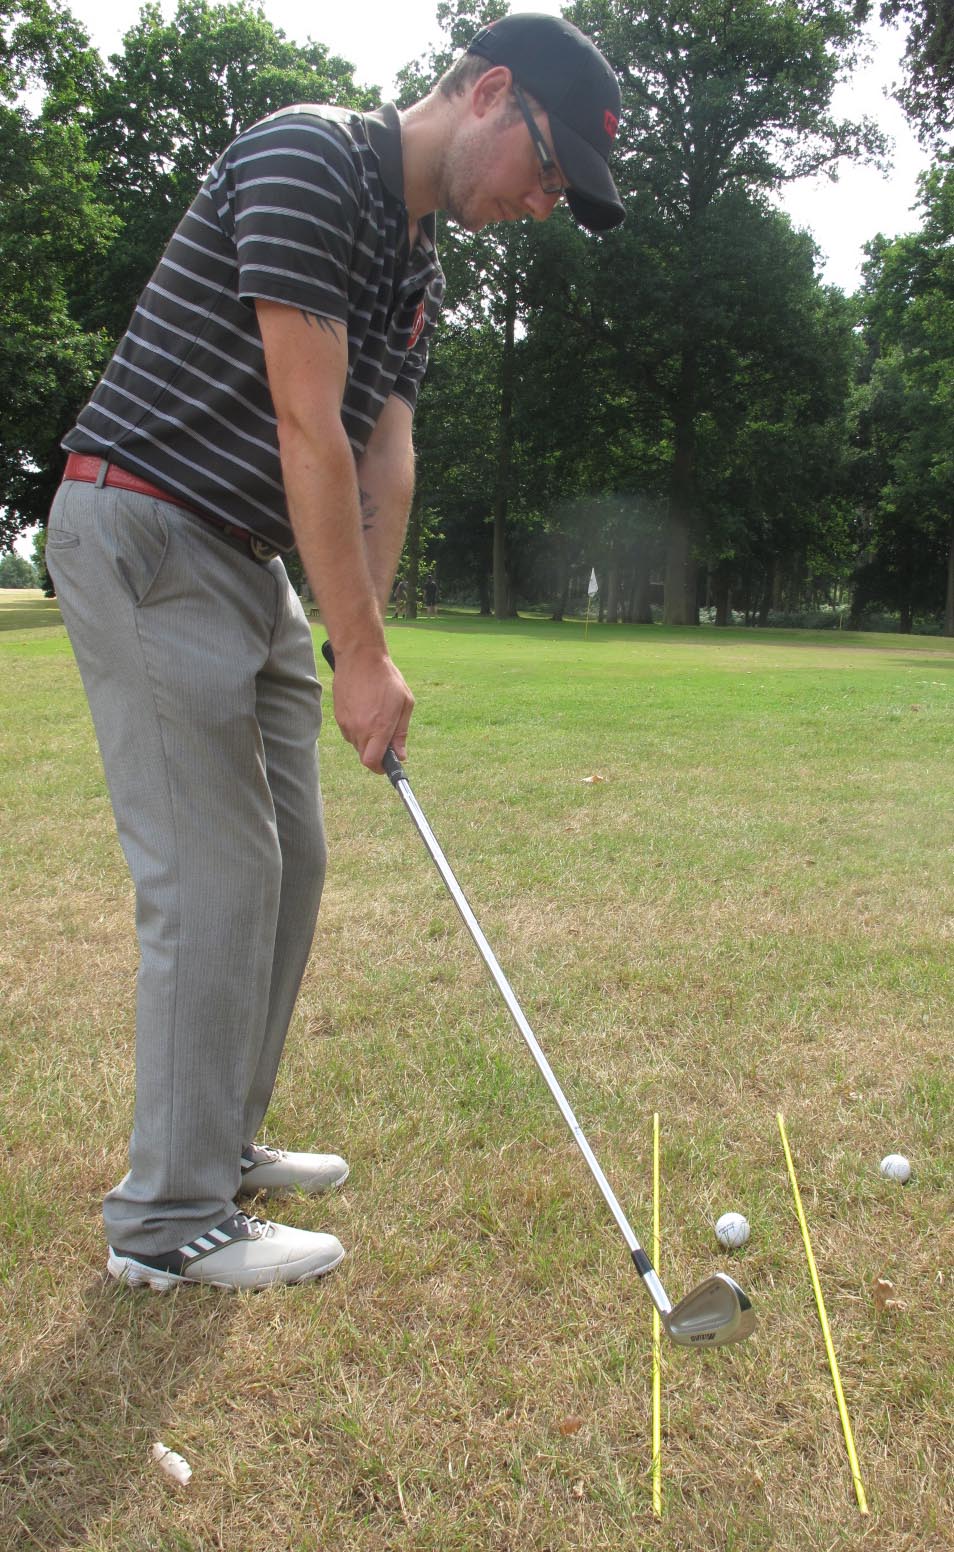 Use alignment markers or golf clubs to help you with the line of your chipping